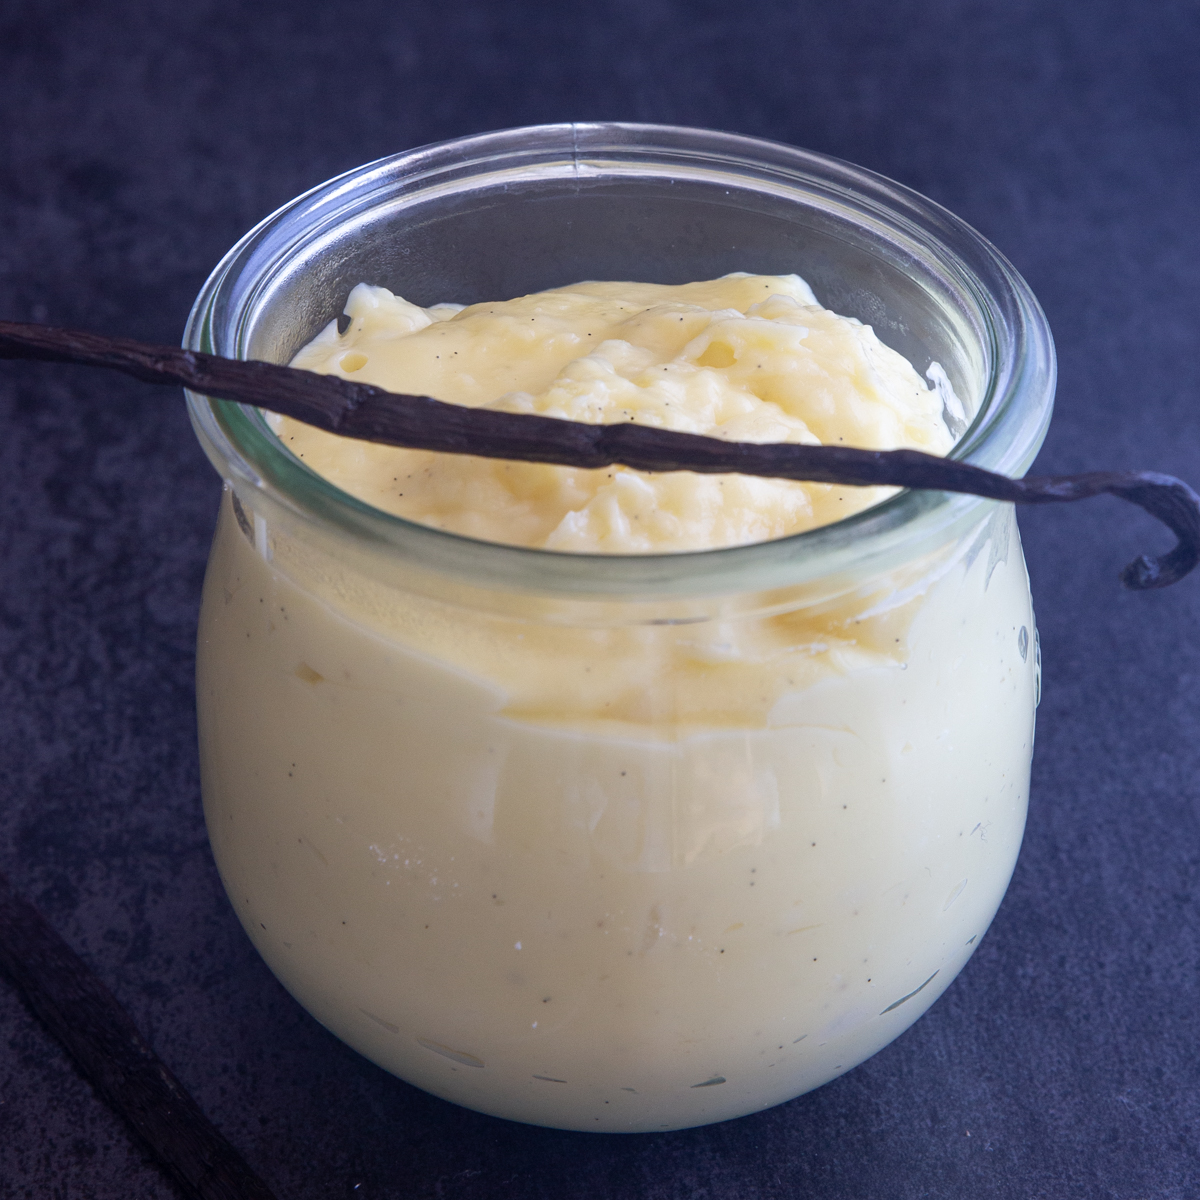 Vanilla pastry cream in a glass jar with a vanilla bean across the top.